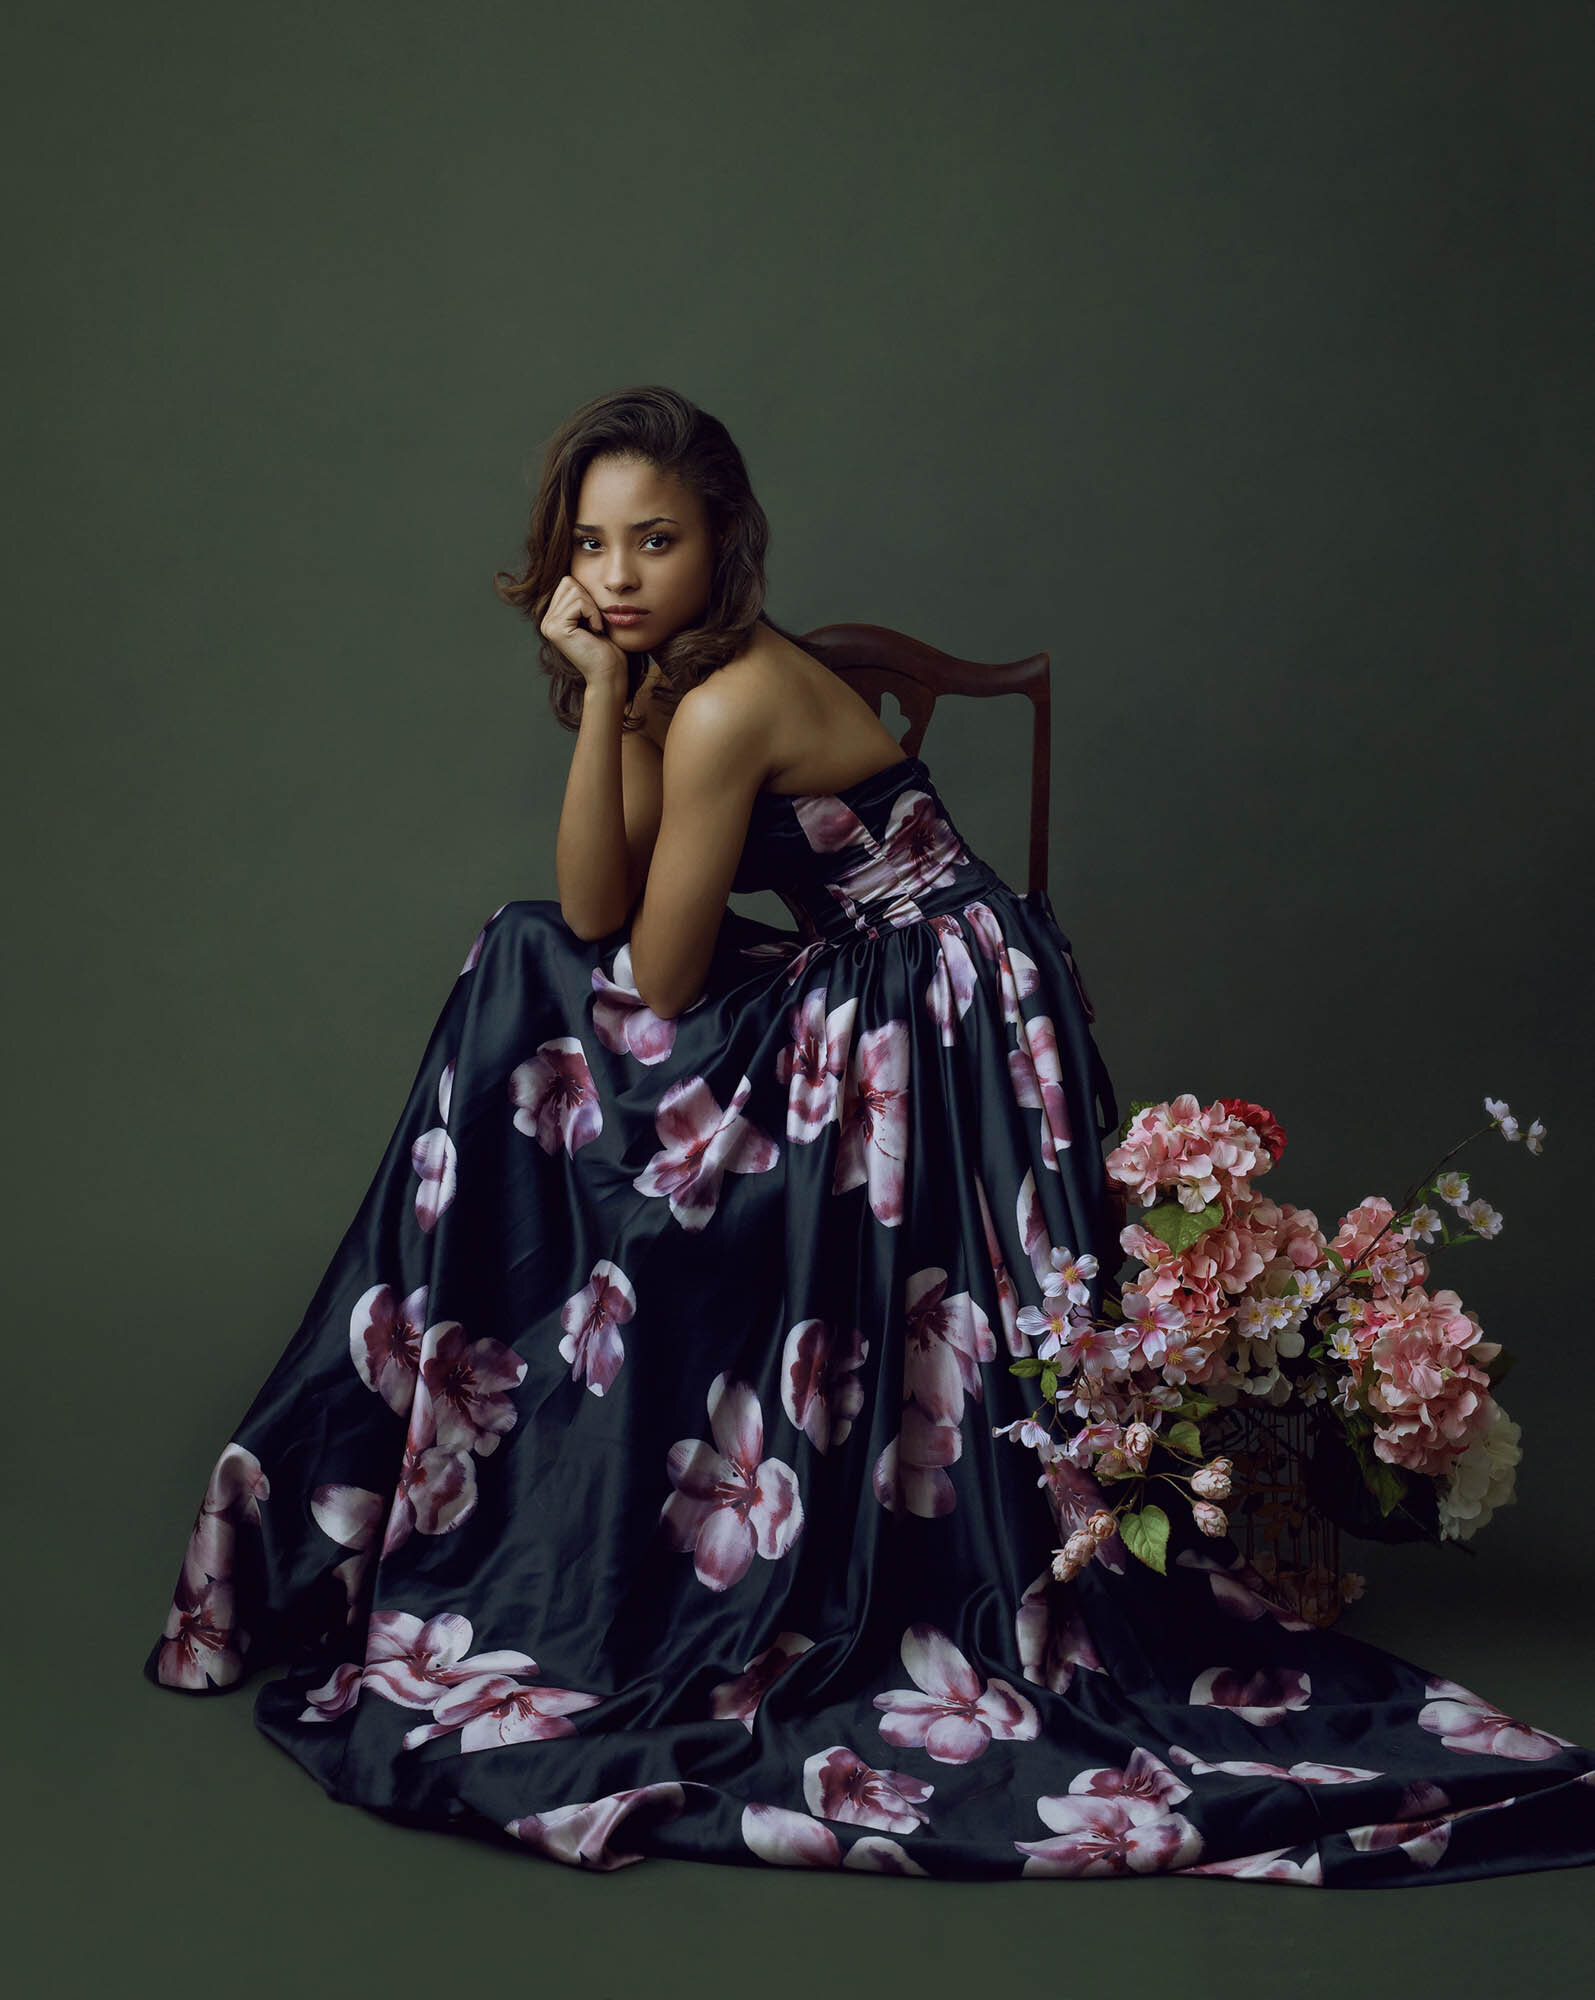 Luxury portrait of a woman in large floral dress, sitting on a chair facing the camera. Houston fine art portraiture.